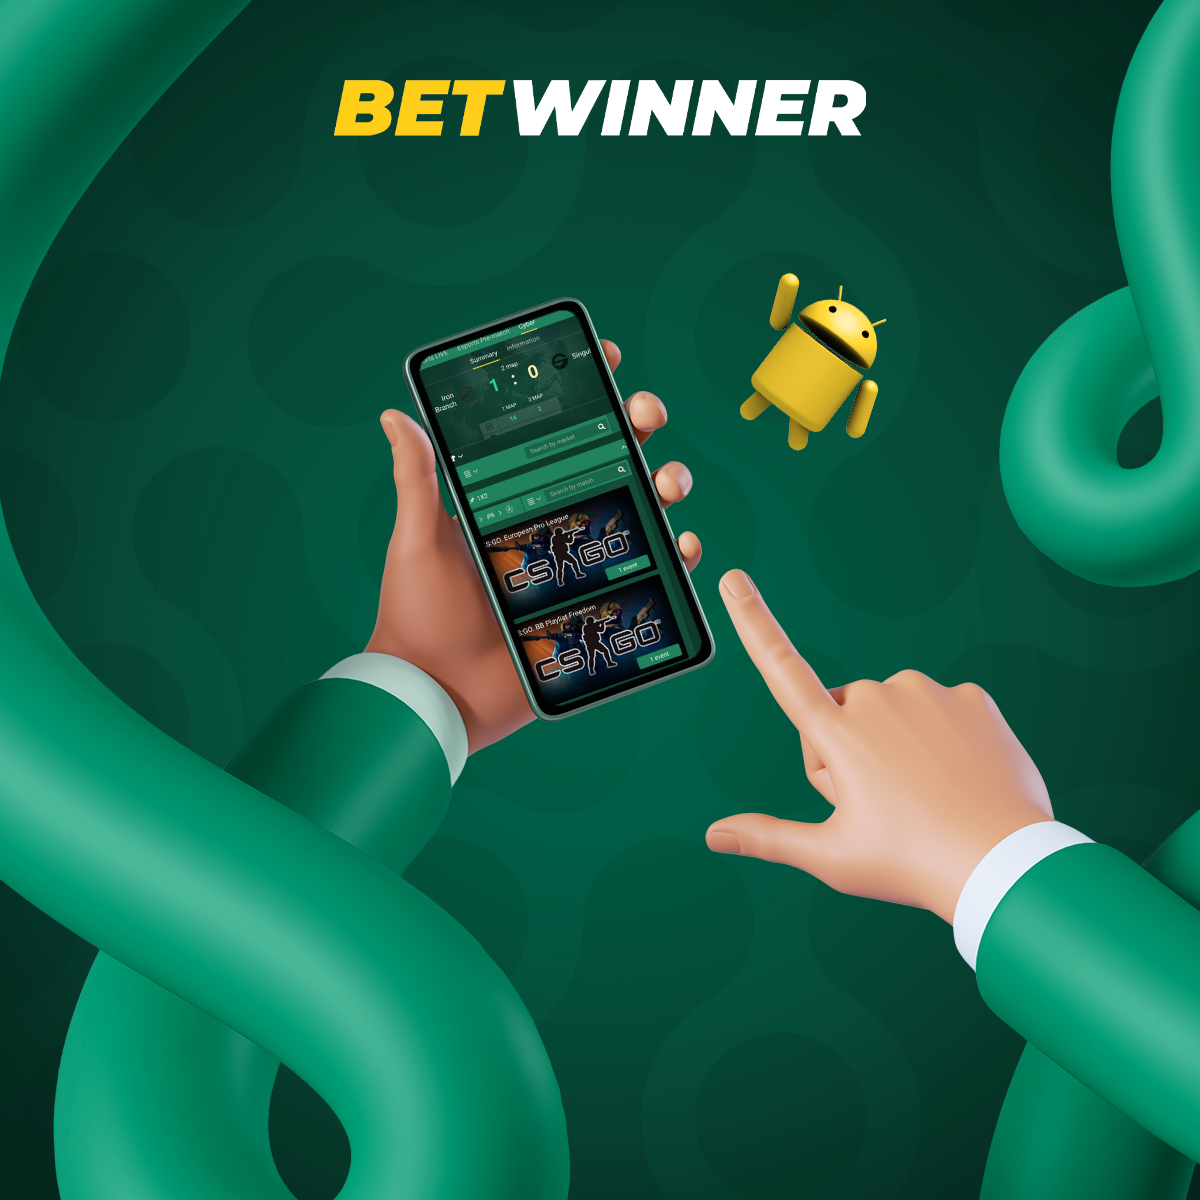 10 Undeniable Facts About betwinner MZ